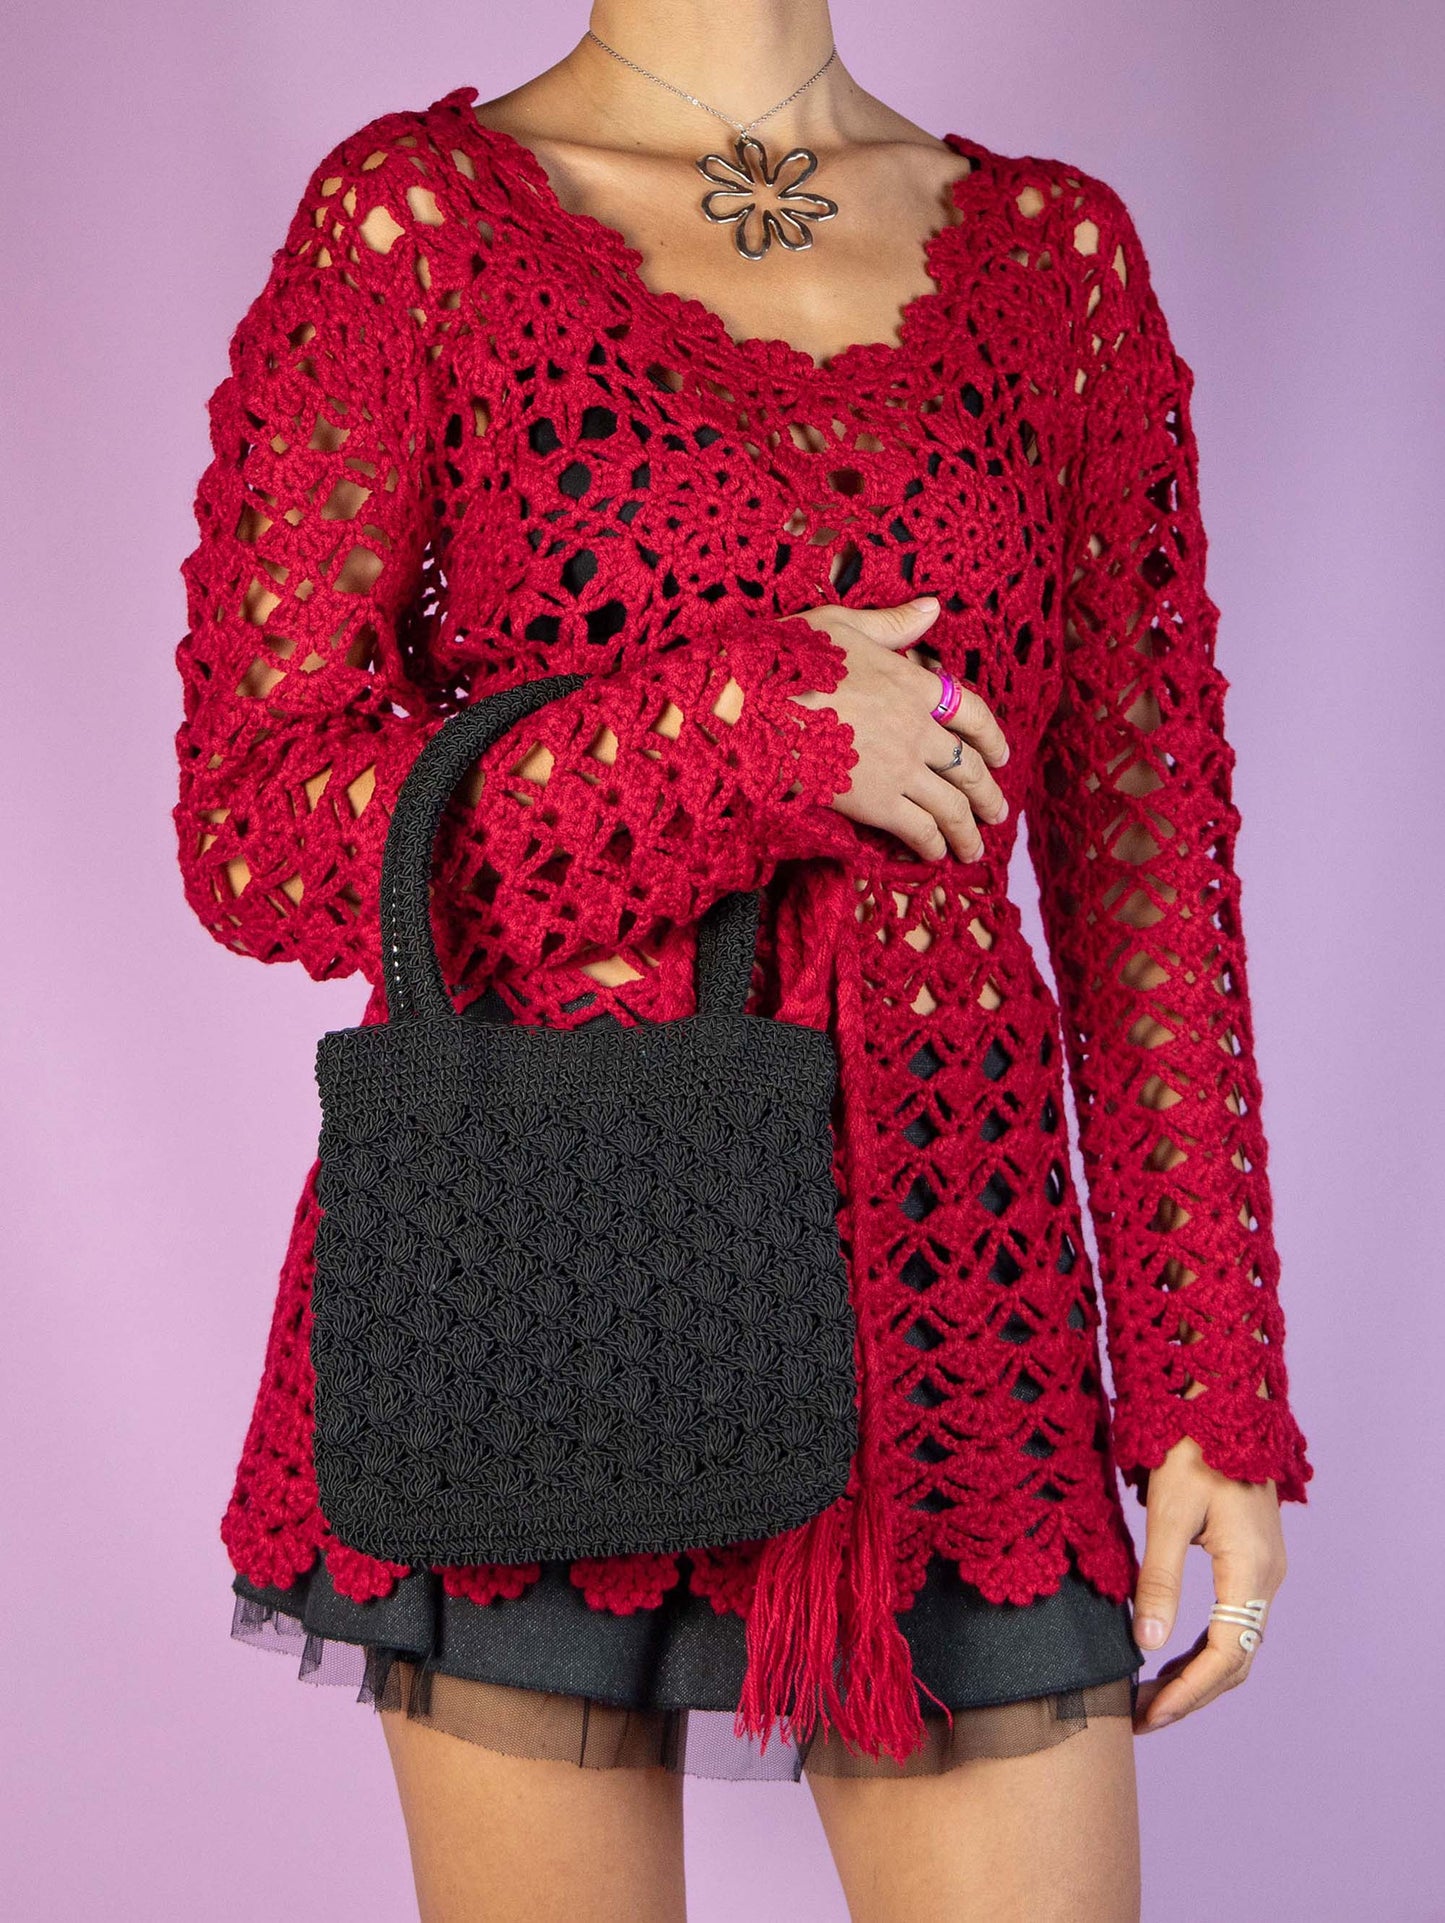 The Y2K Black Crochet Mini Bag is a vintage 2000s boho party style handbag with a top handle, crafted in a crochet-style with a zipper closure.